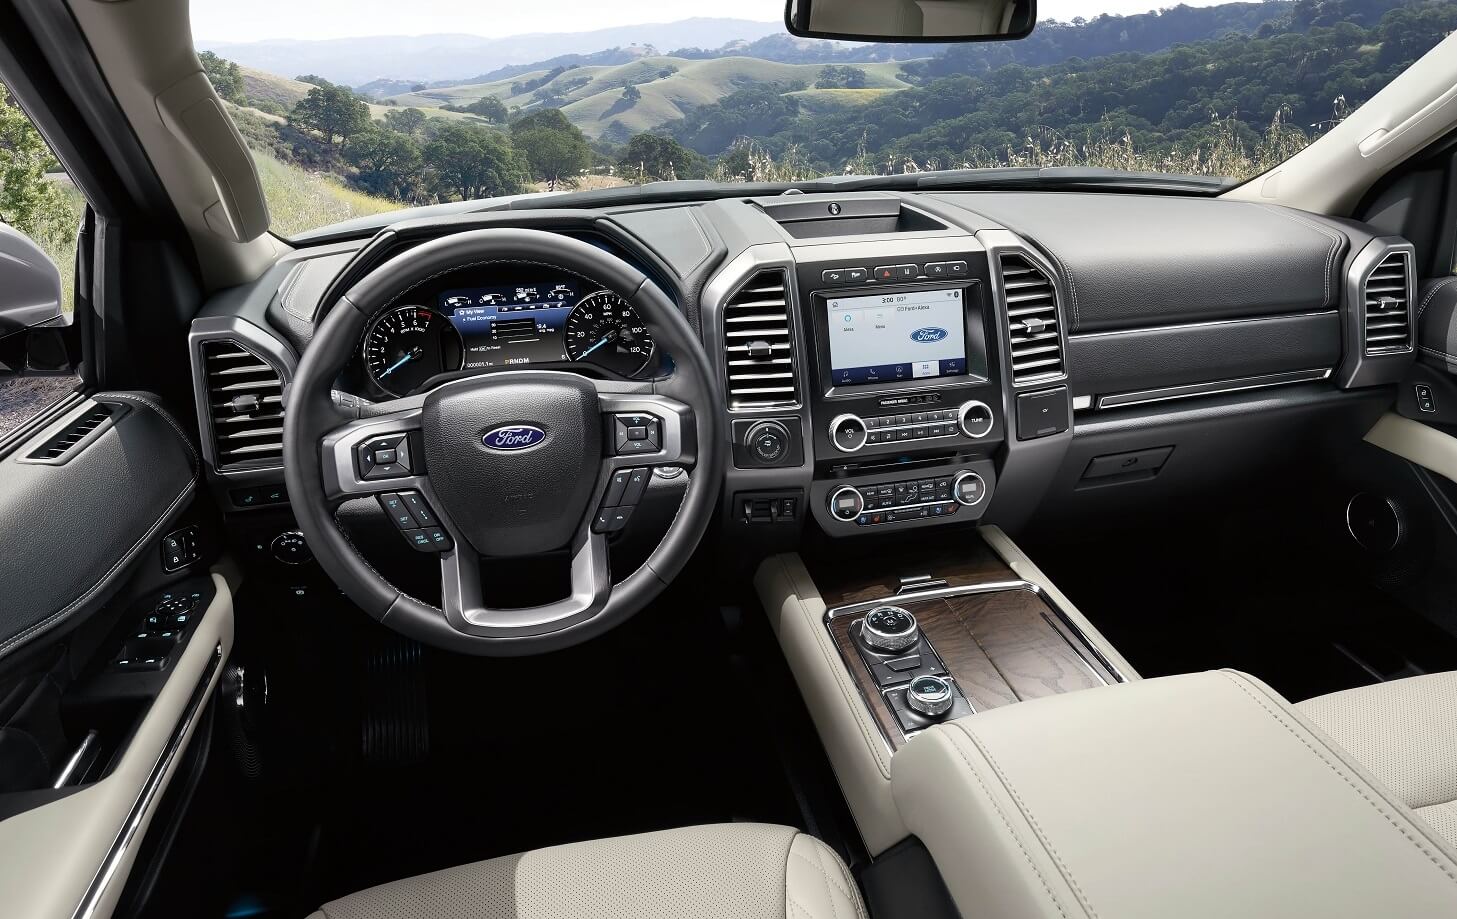 Ford Expedition Interior Technology